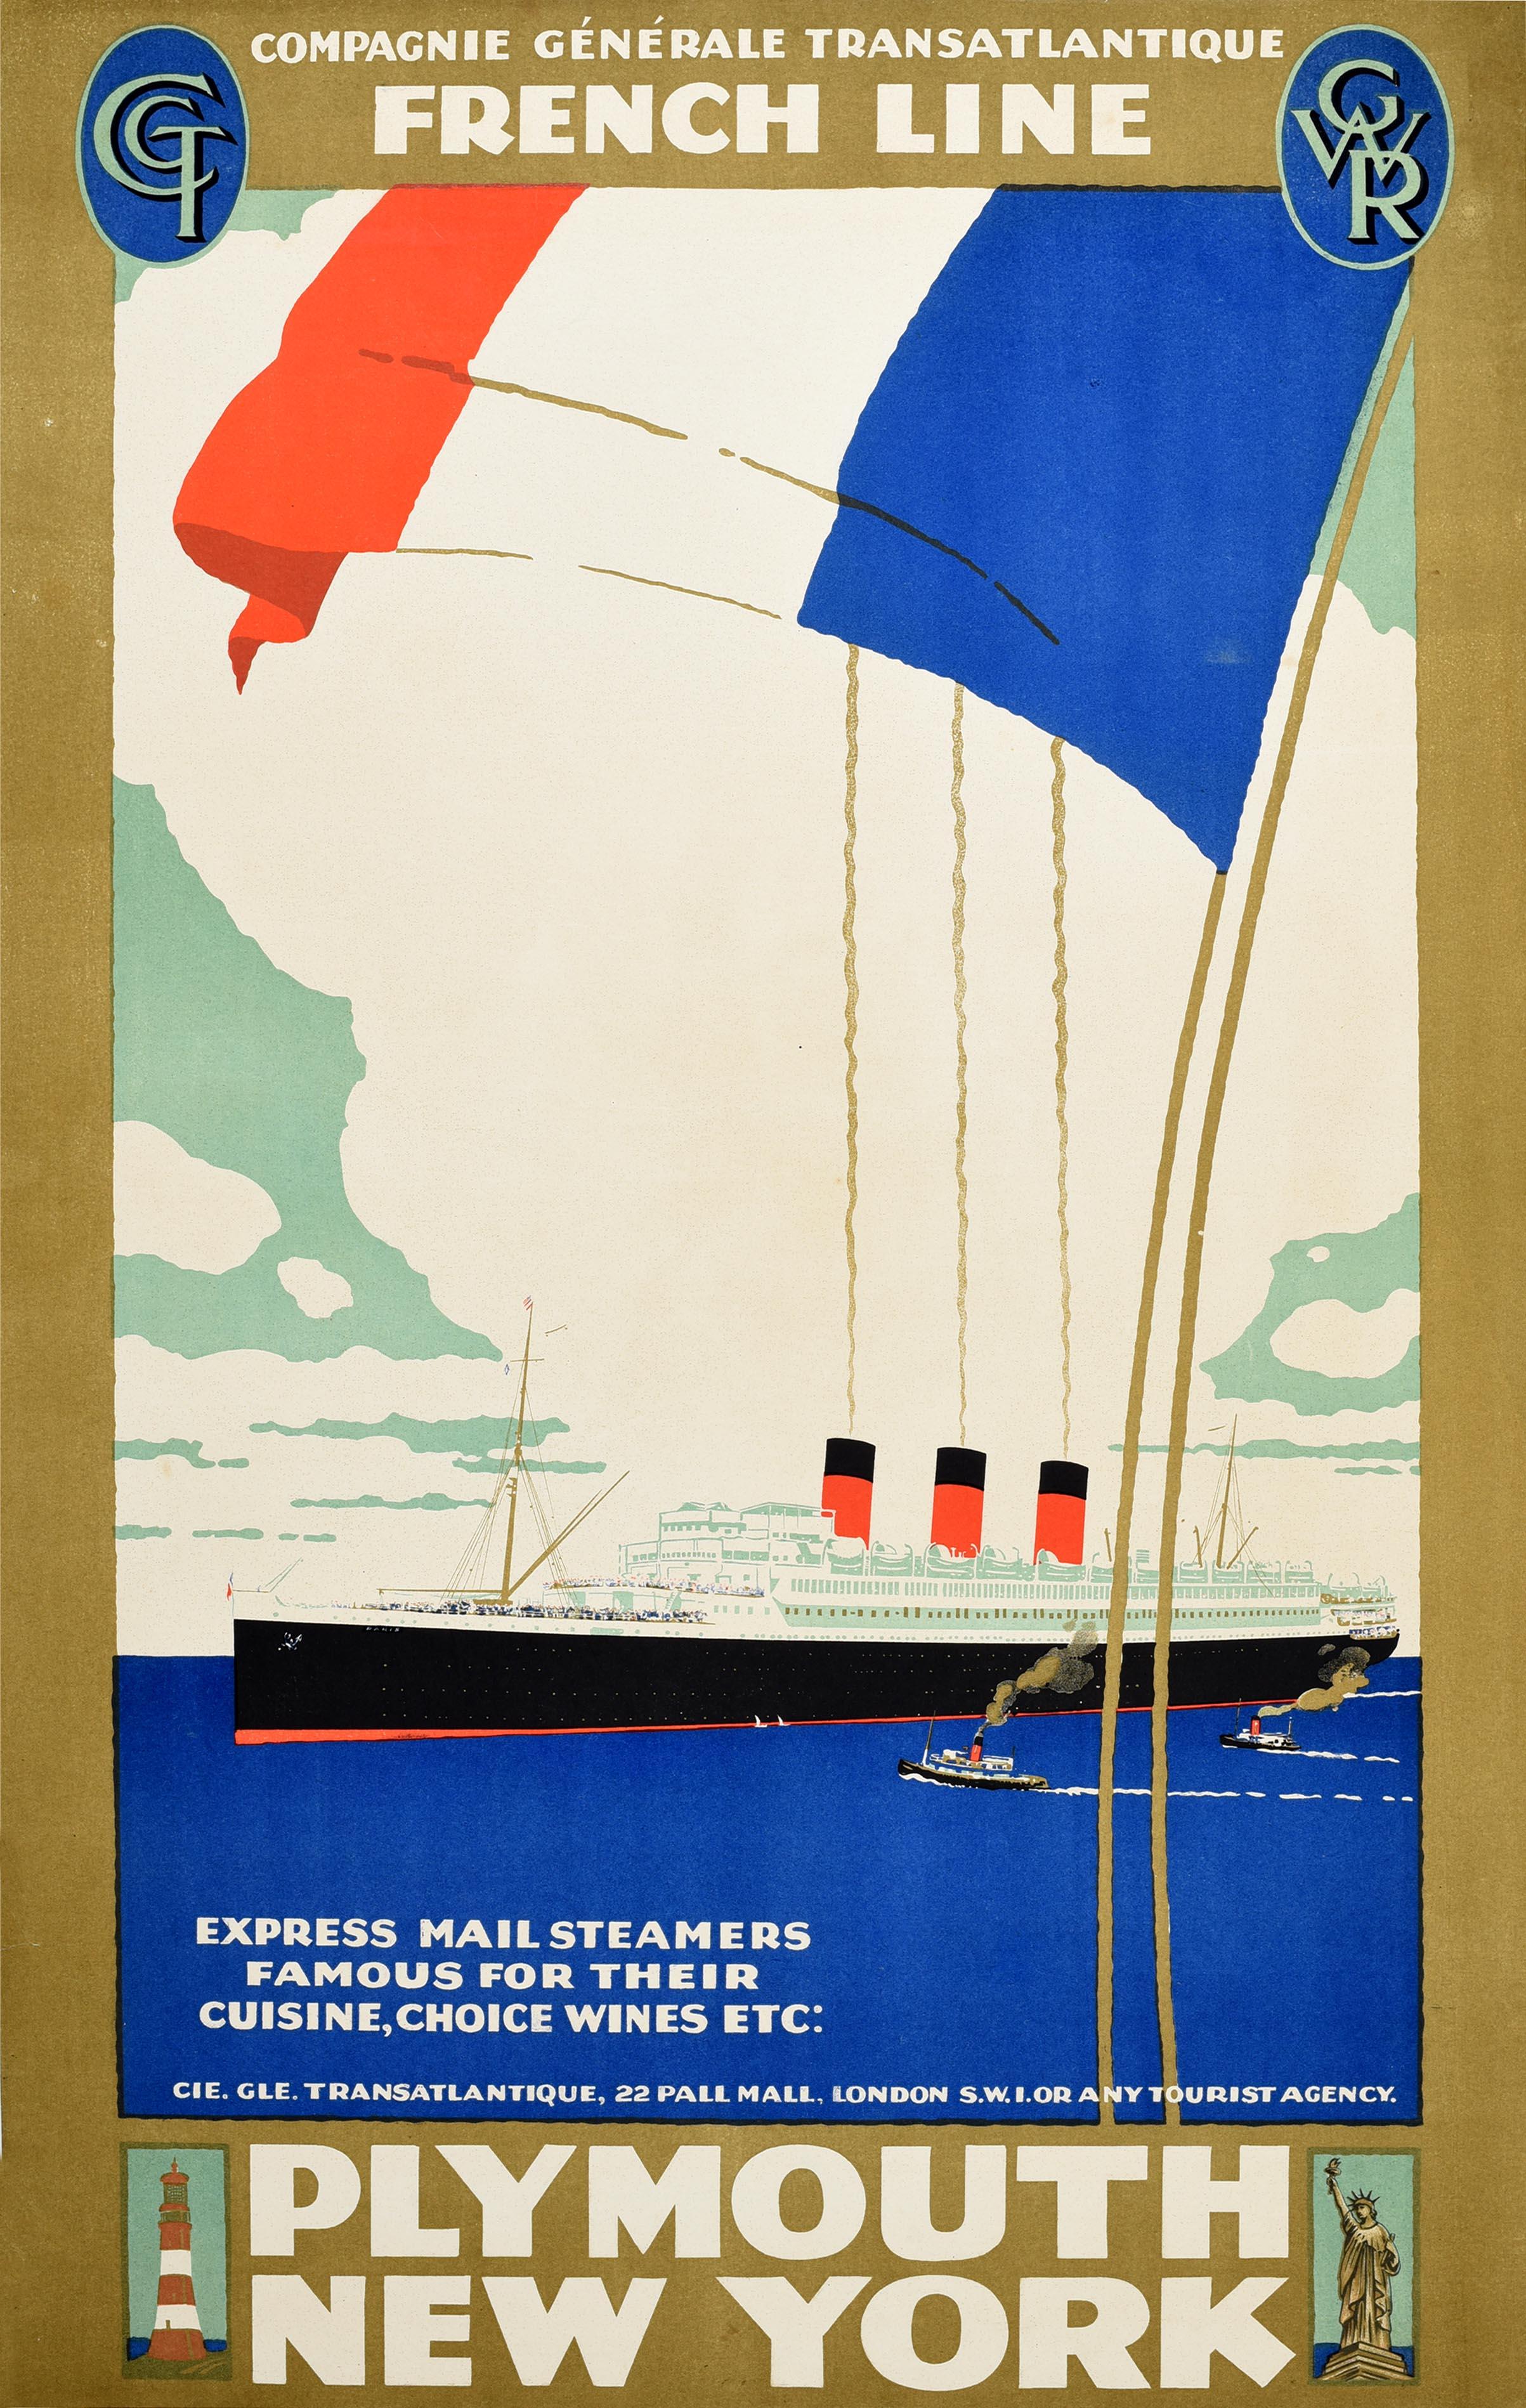 Unknown Print - Original Vintage Travel Poster French Line Cruise Ship Plymouth New York Steamer